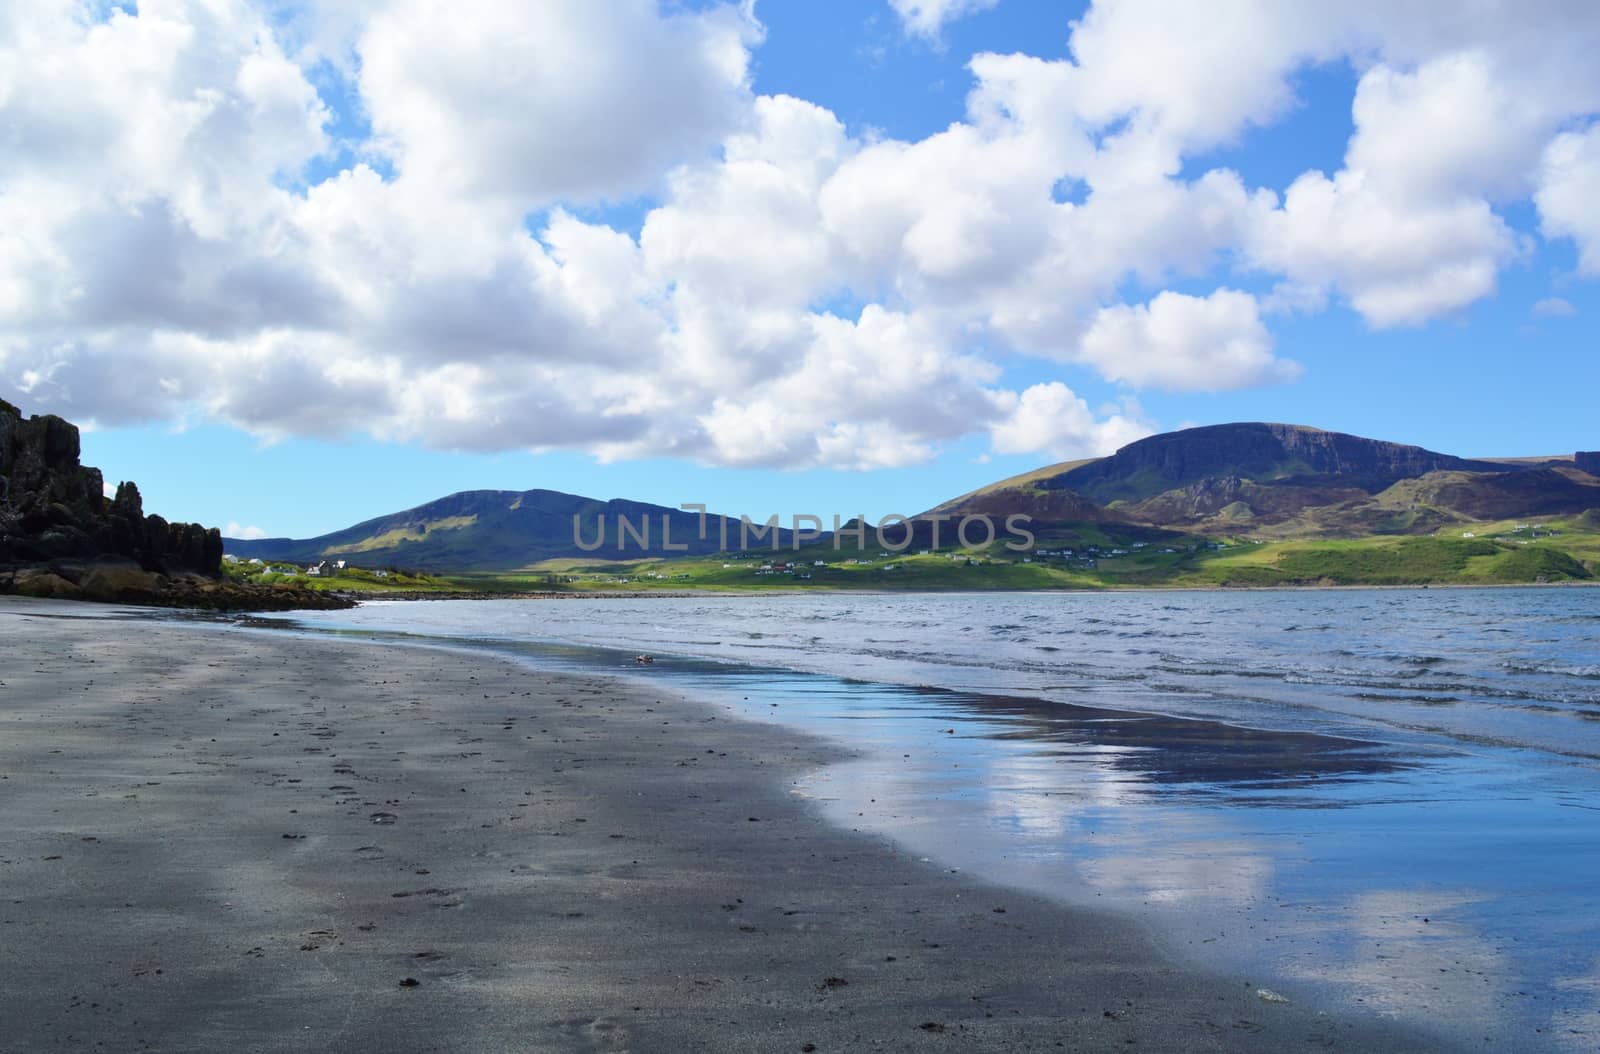 A peaceful beach photographed at Staffin on the Isle of Skye.